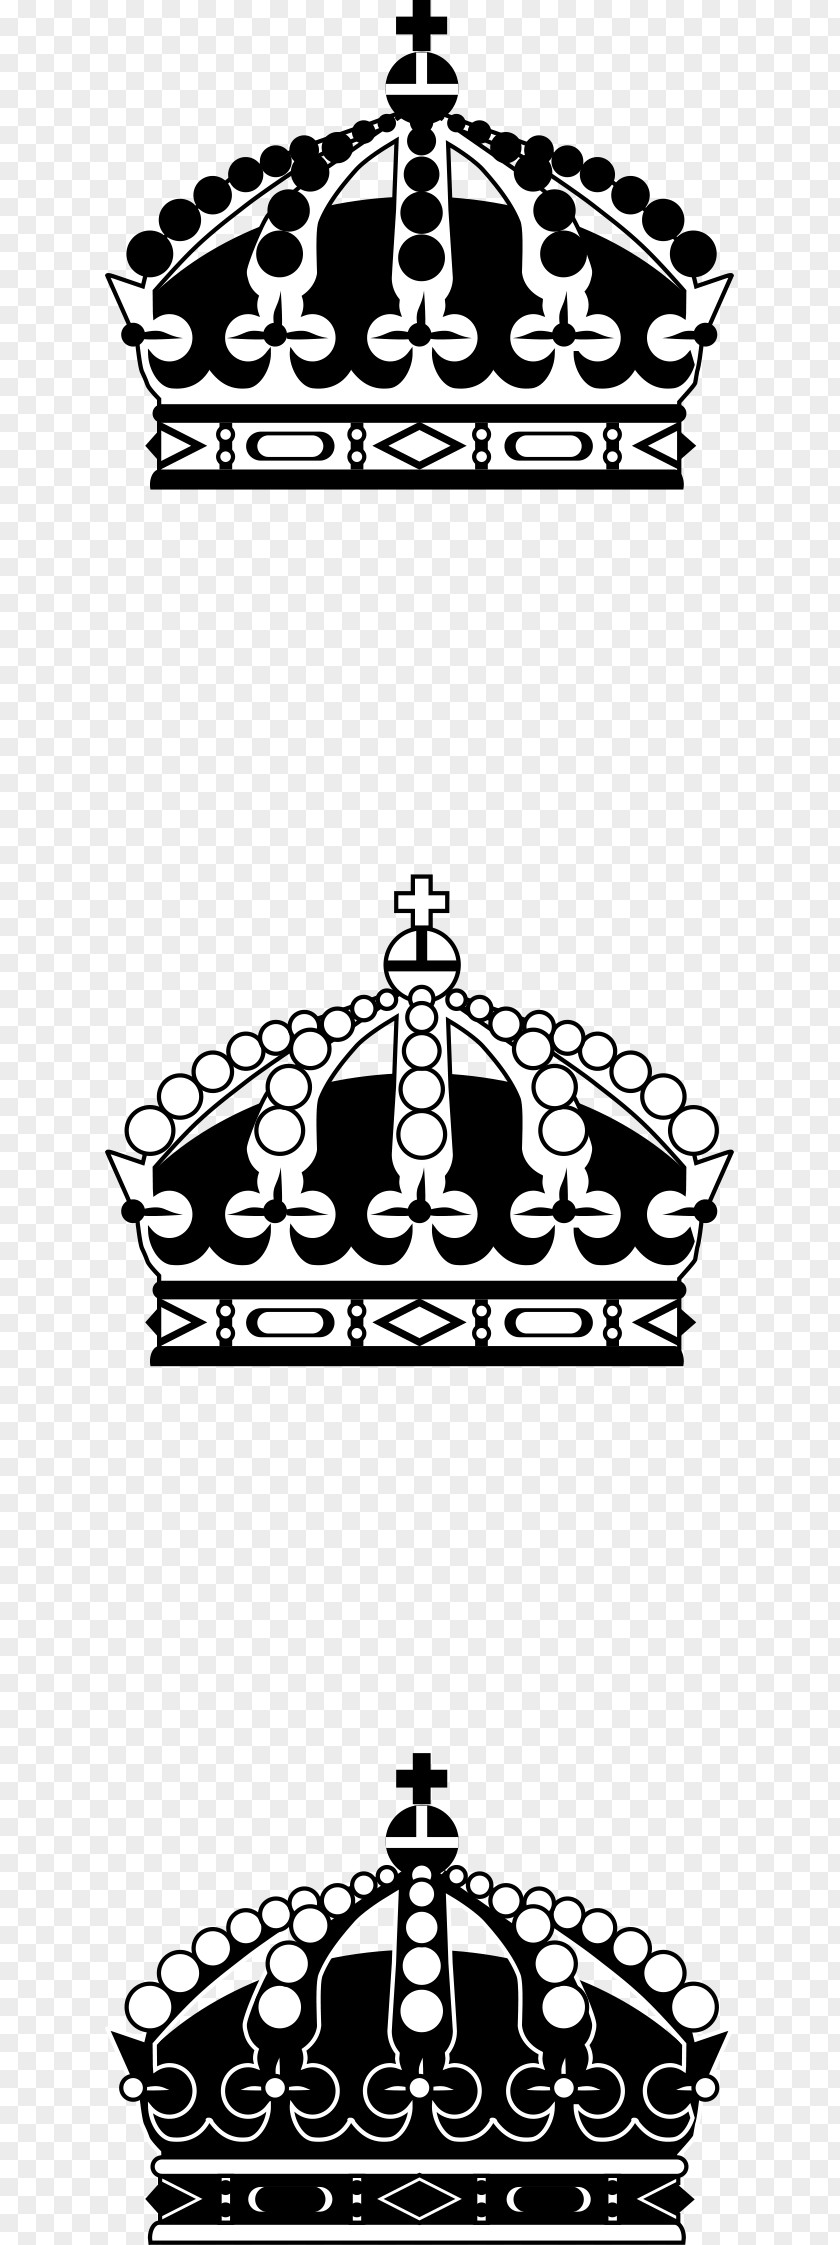 Imperial Crown Black And White Clip Art PNG